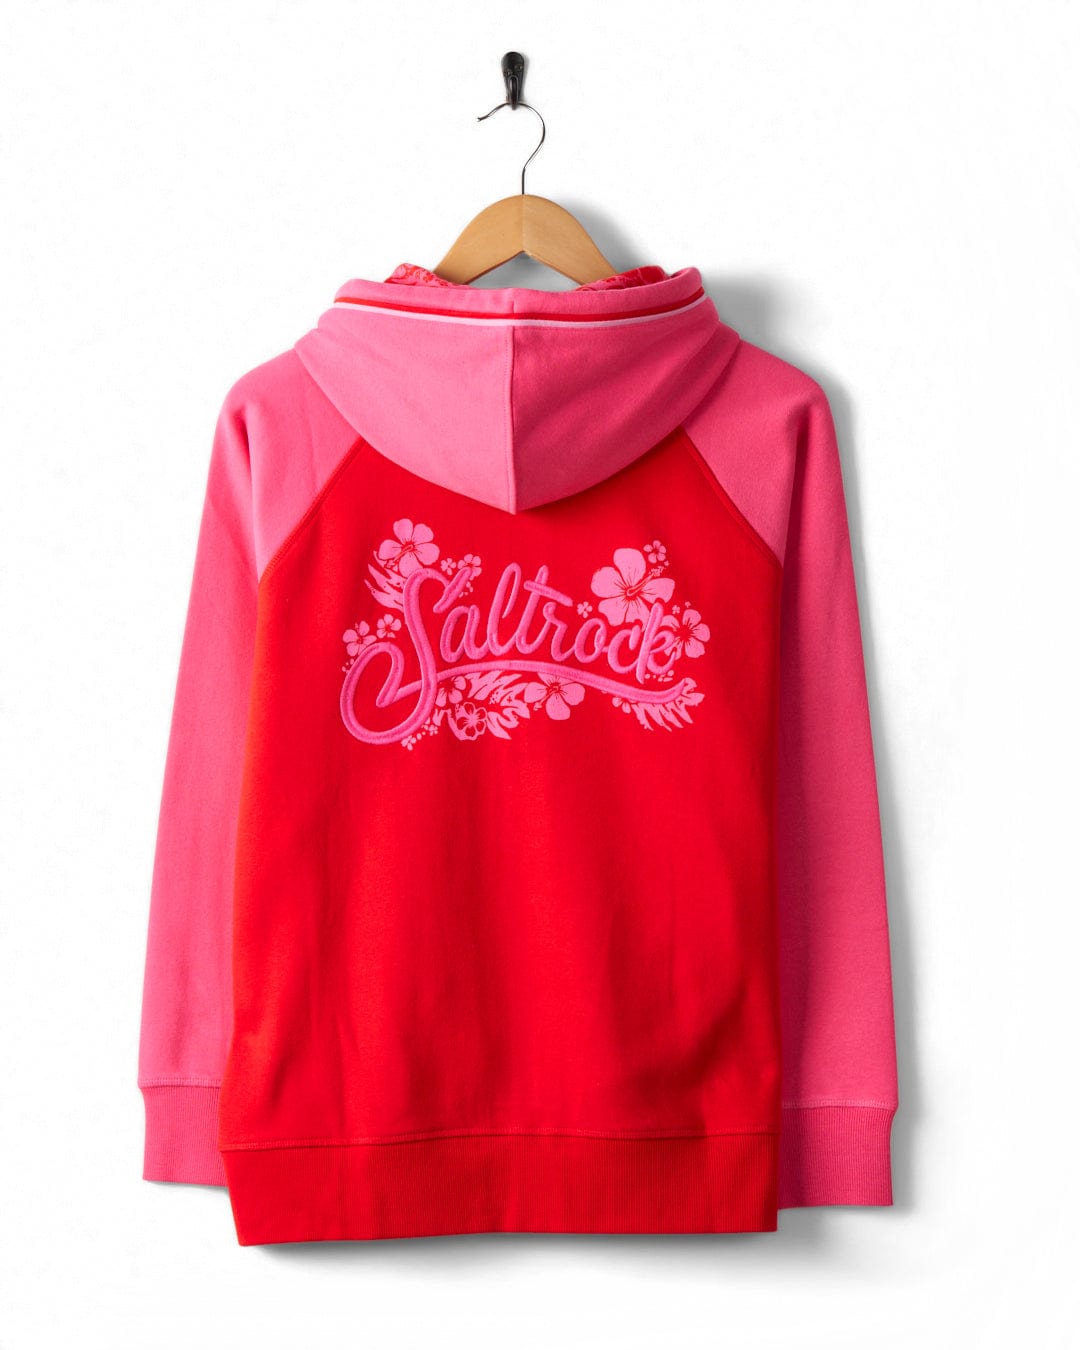 A red and pink hooded sweatshirt with the word "Saltrock" and floral designs printed on the back is hanging on a wooden hanger against a white background. This cotton, embroidered Tropic - Womens Zip Hoodie - Red by Saltrock combines comfort with style perfectly.